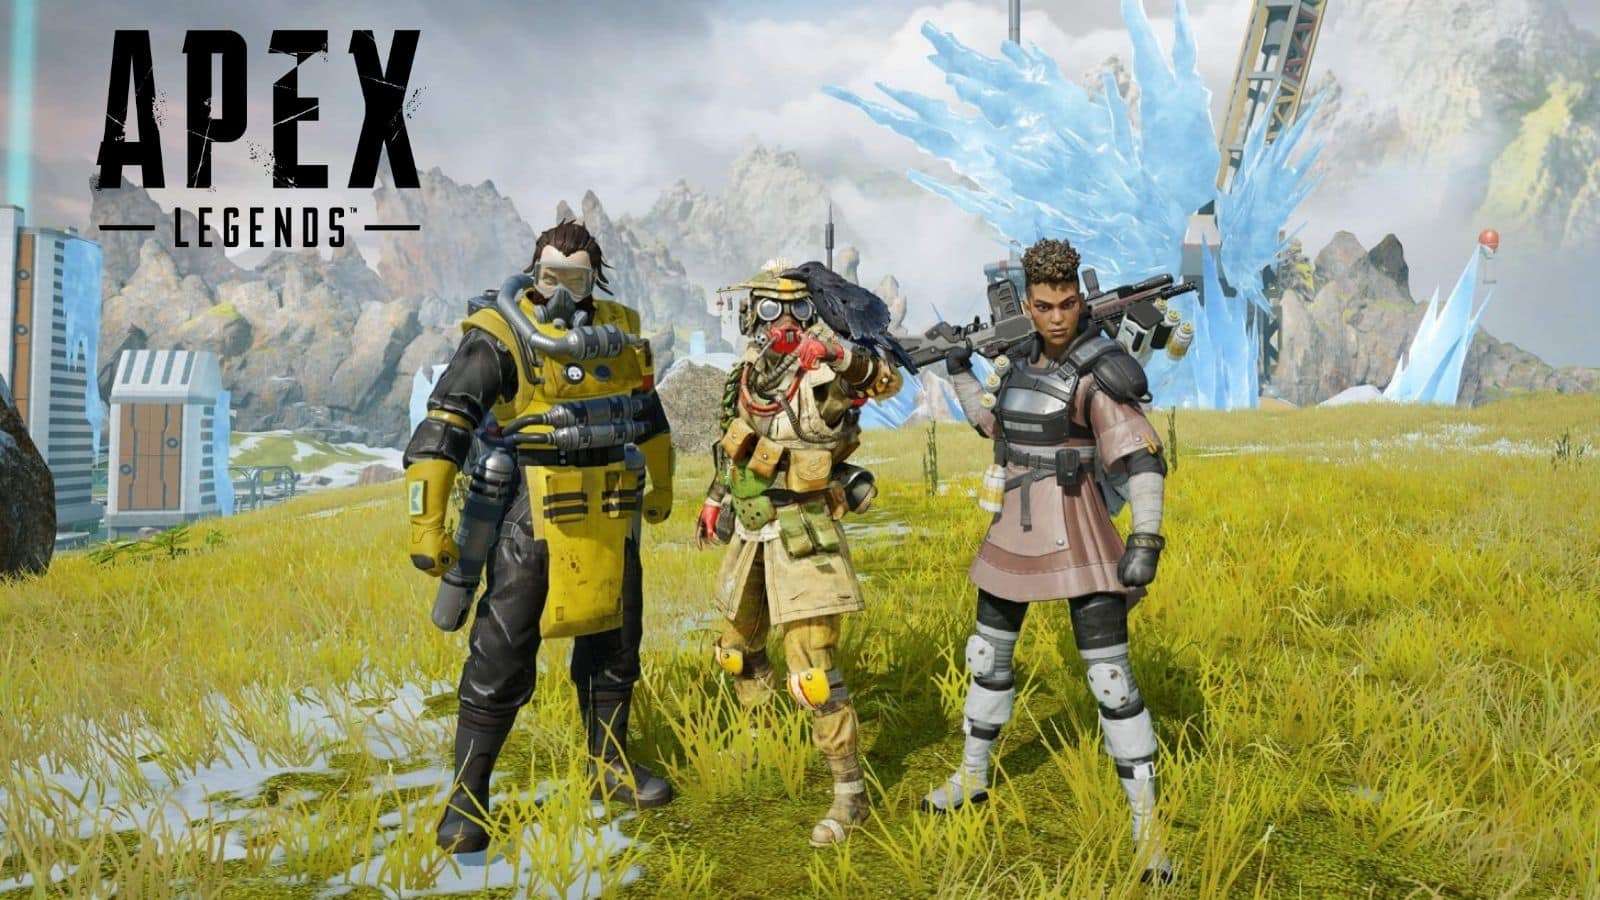 When did Apex Legends come out?